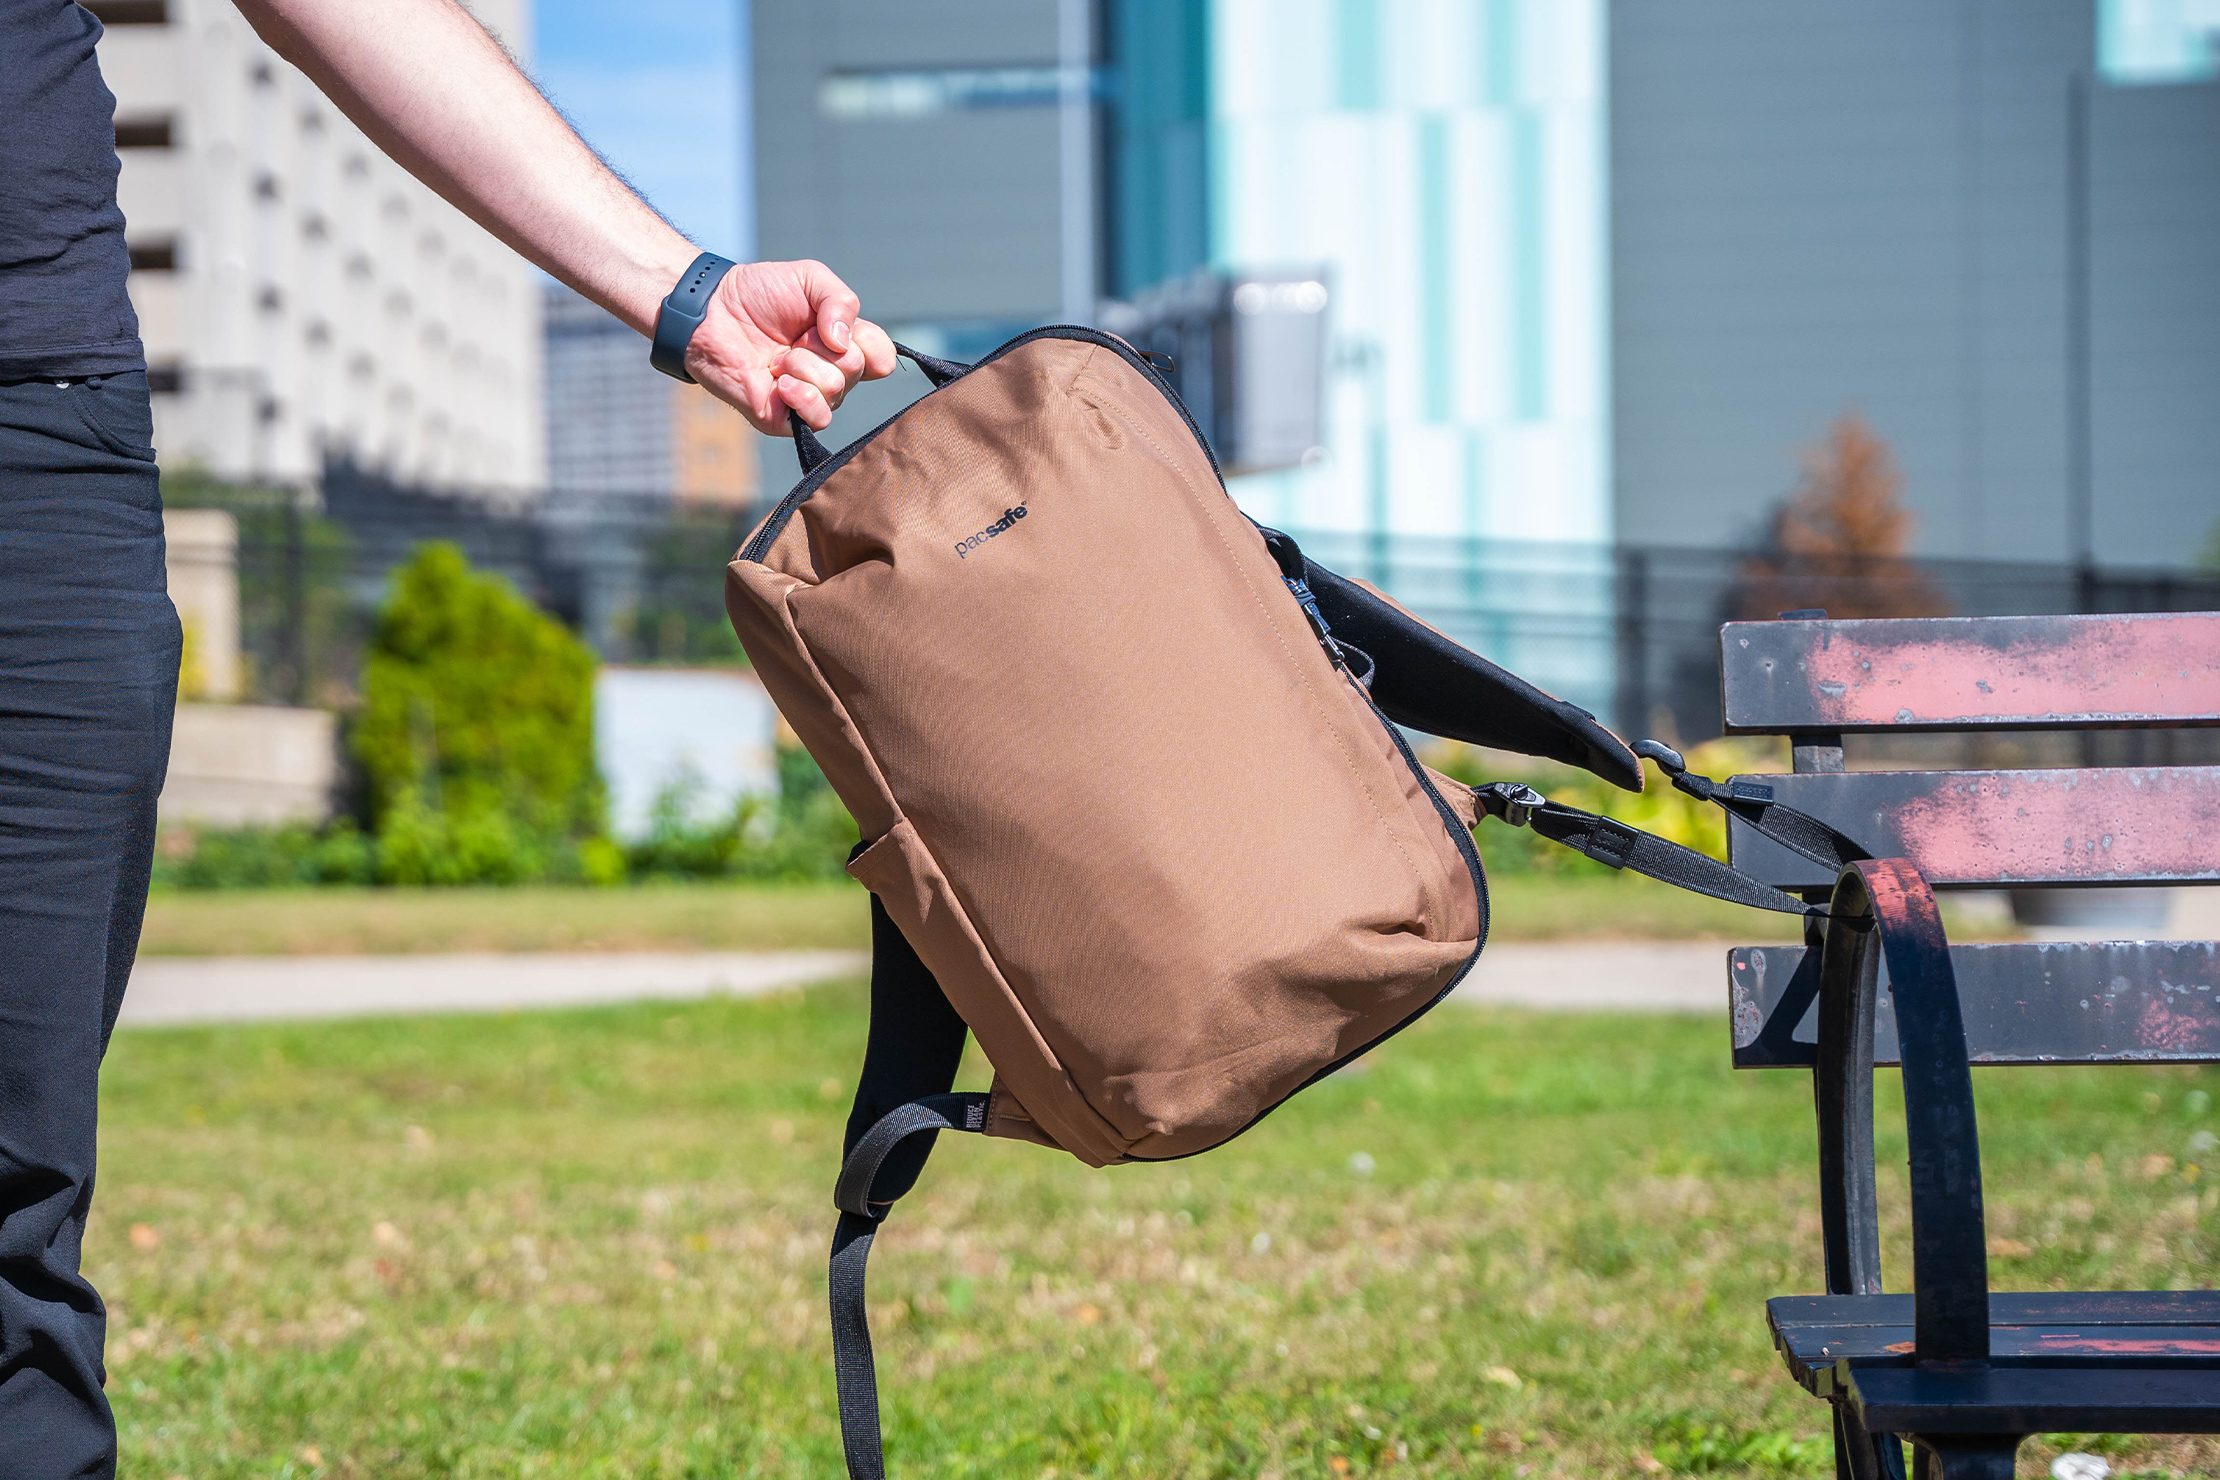 Pacsafe Metrosafe X Commuter Backpack | Smart packing is a must to prevent the pack from getting too bulky.